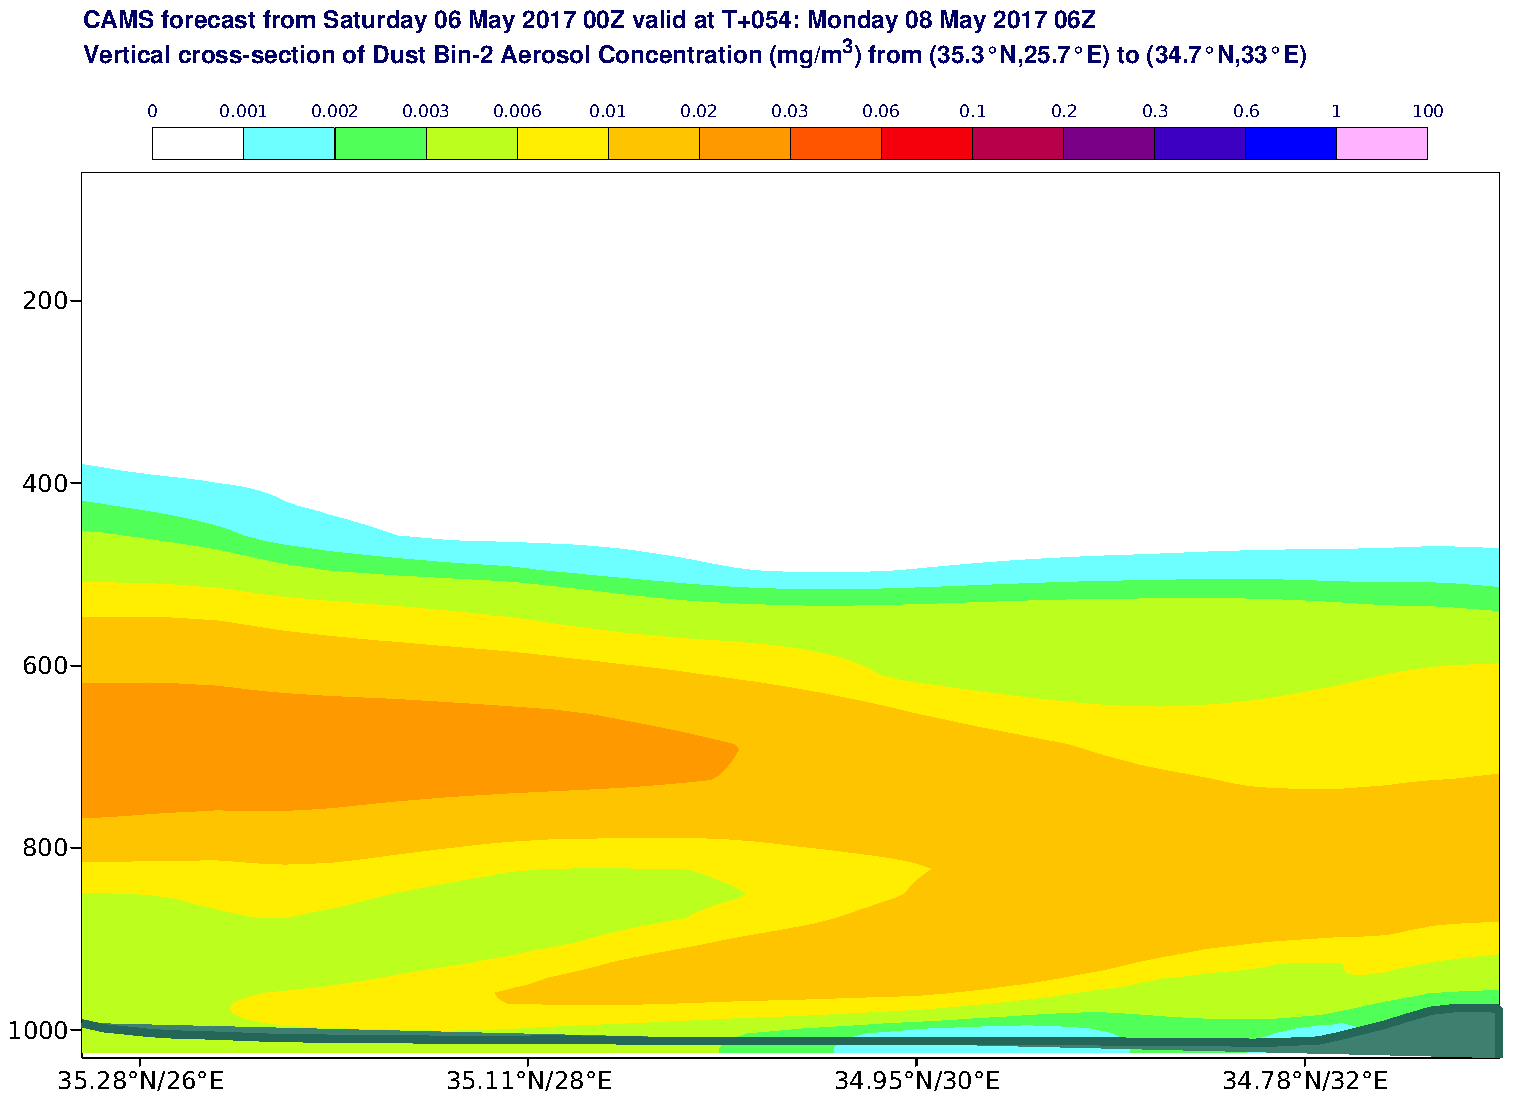 Vertical cross-section of Dust Bin-2 Aerosol Concentration (mg/m3) valid at T54 - 2017-05-08 06:00